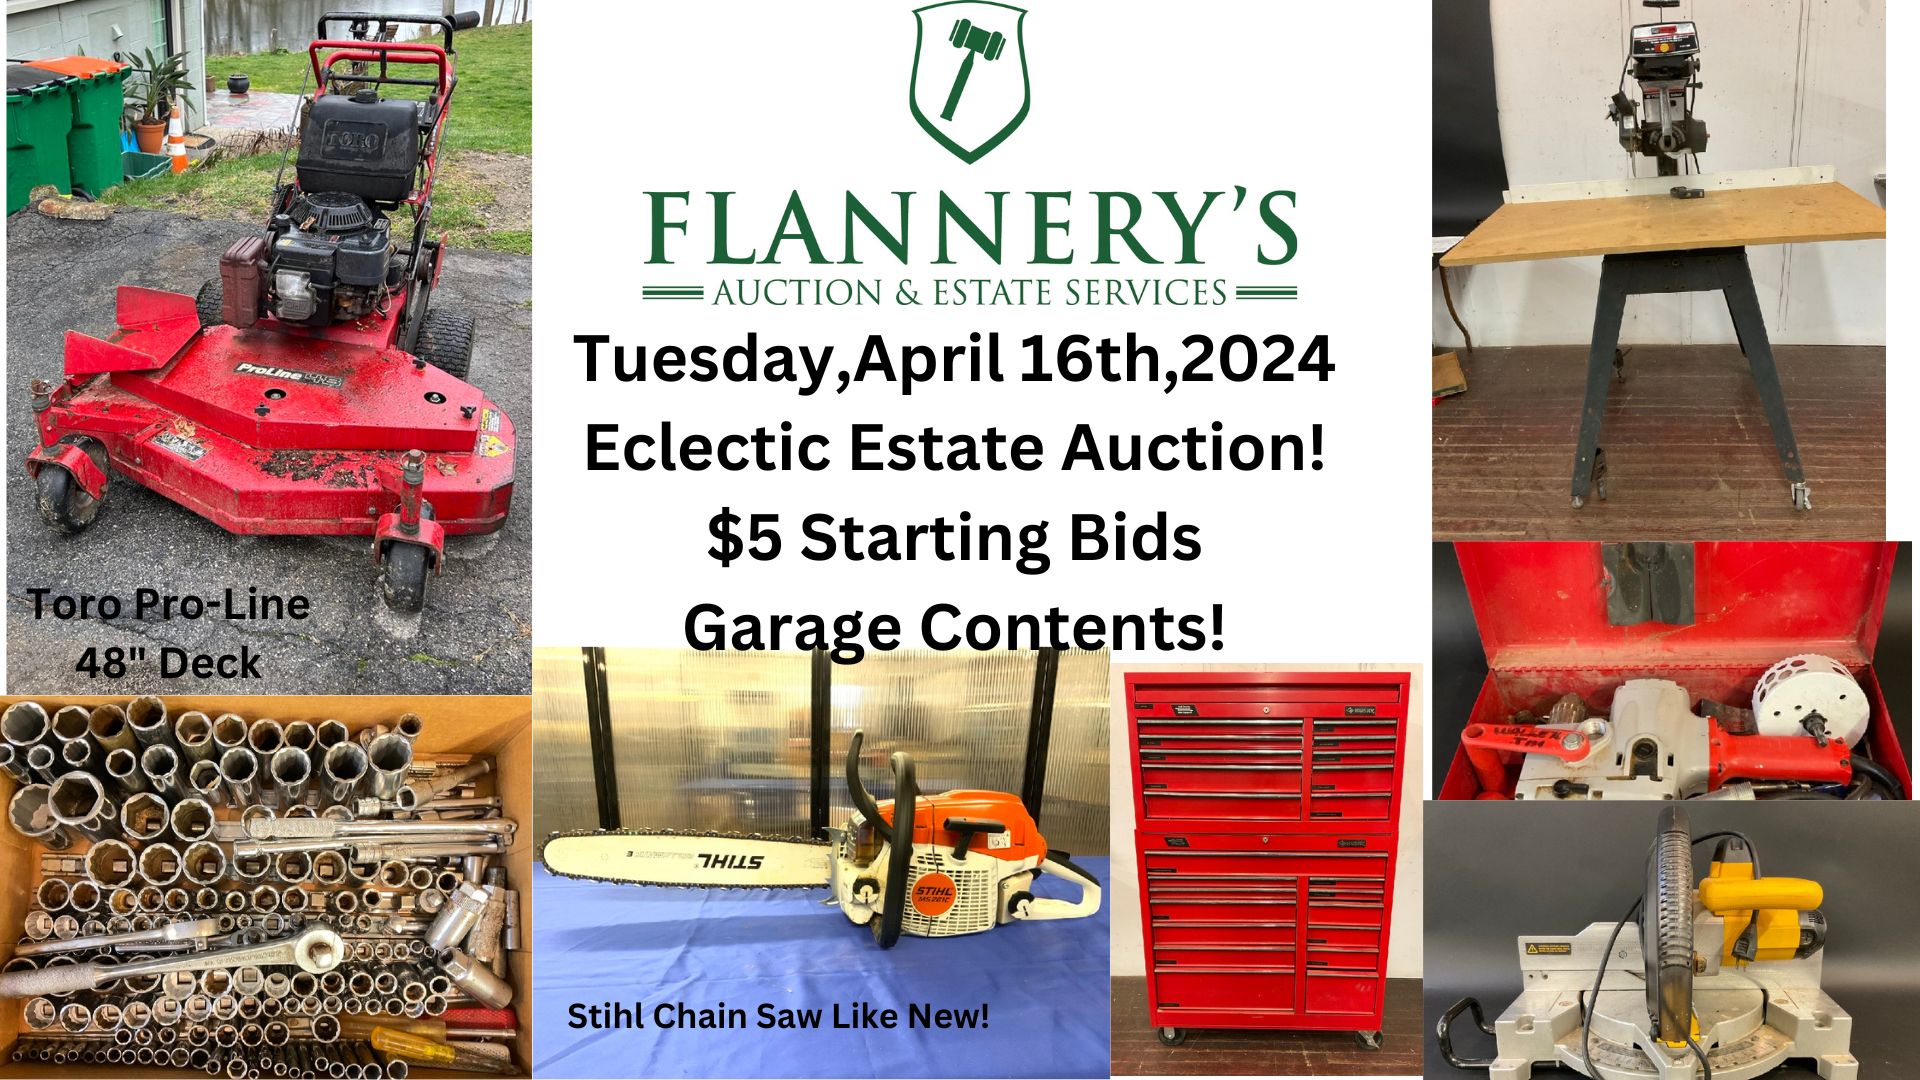 Eclectic Estate $5 Starting Bid Auction! TOOLS, SPRING RELATED & More! Tuesday April 16th, 2024 @ 5pm!